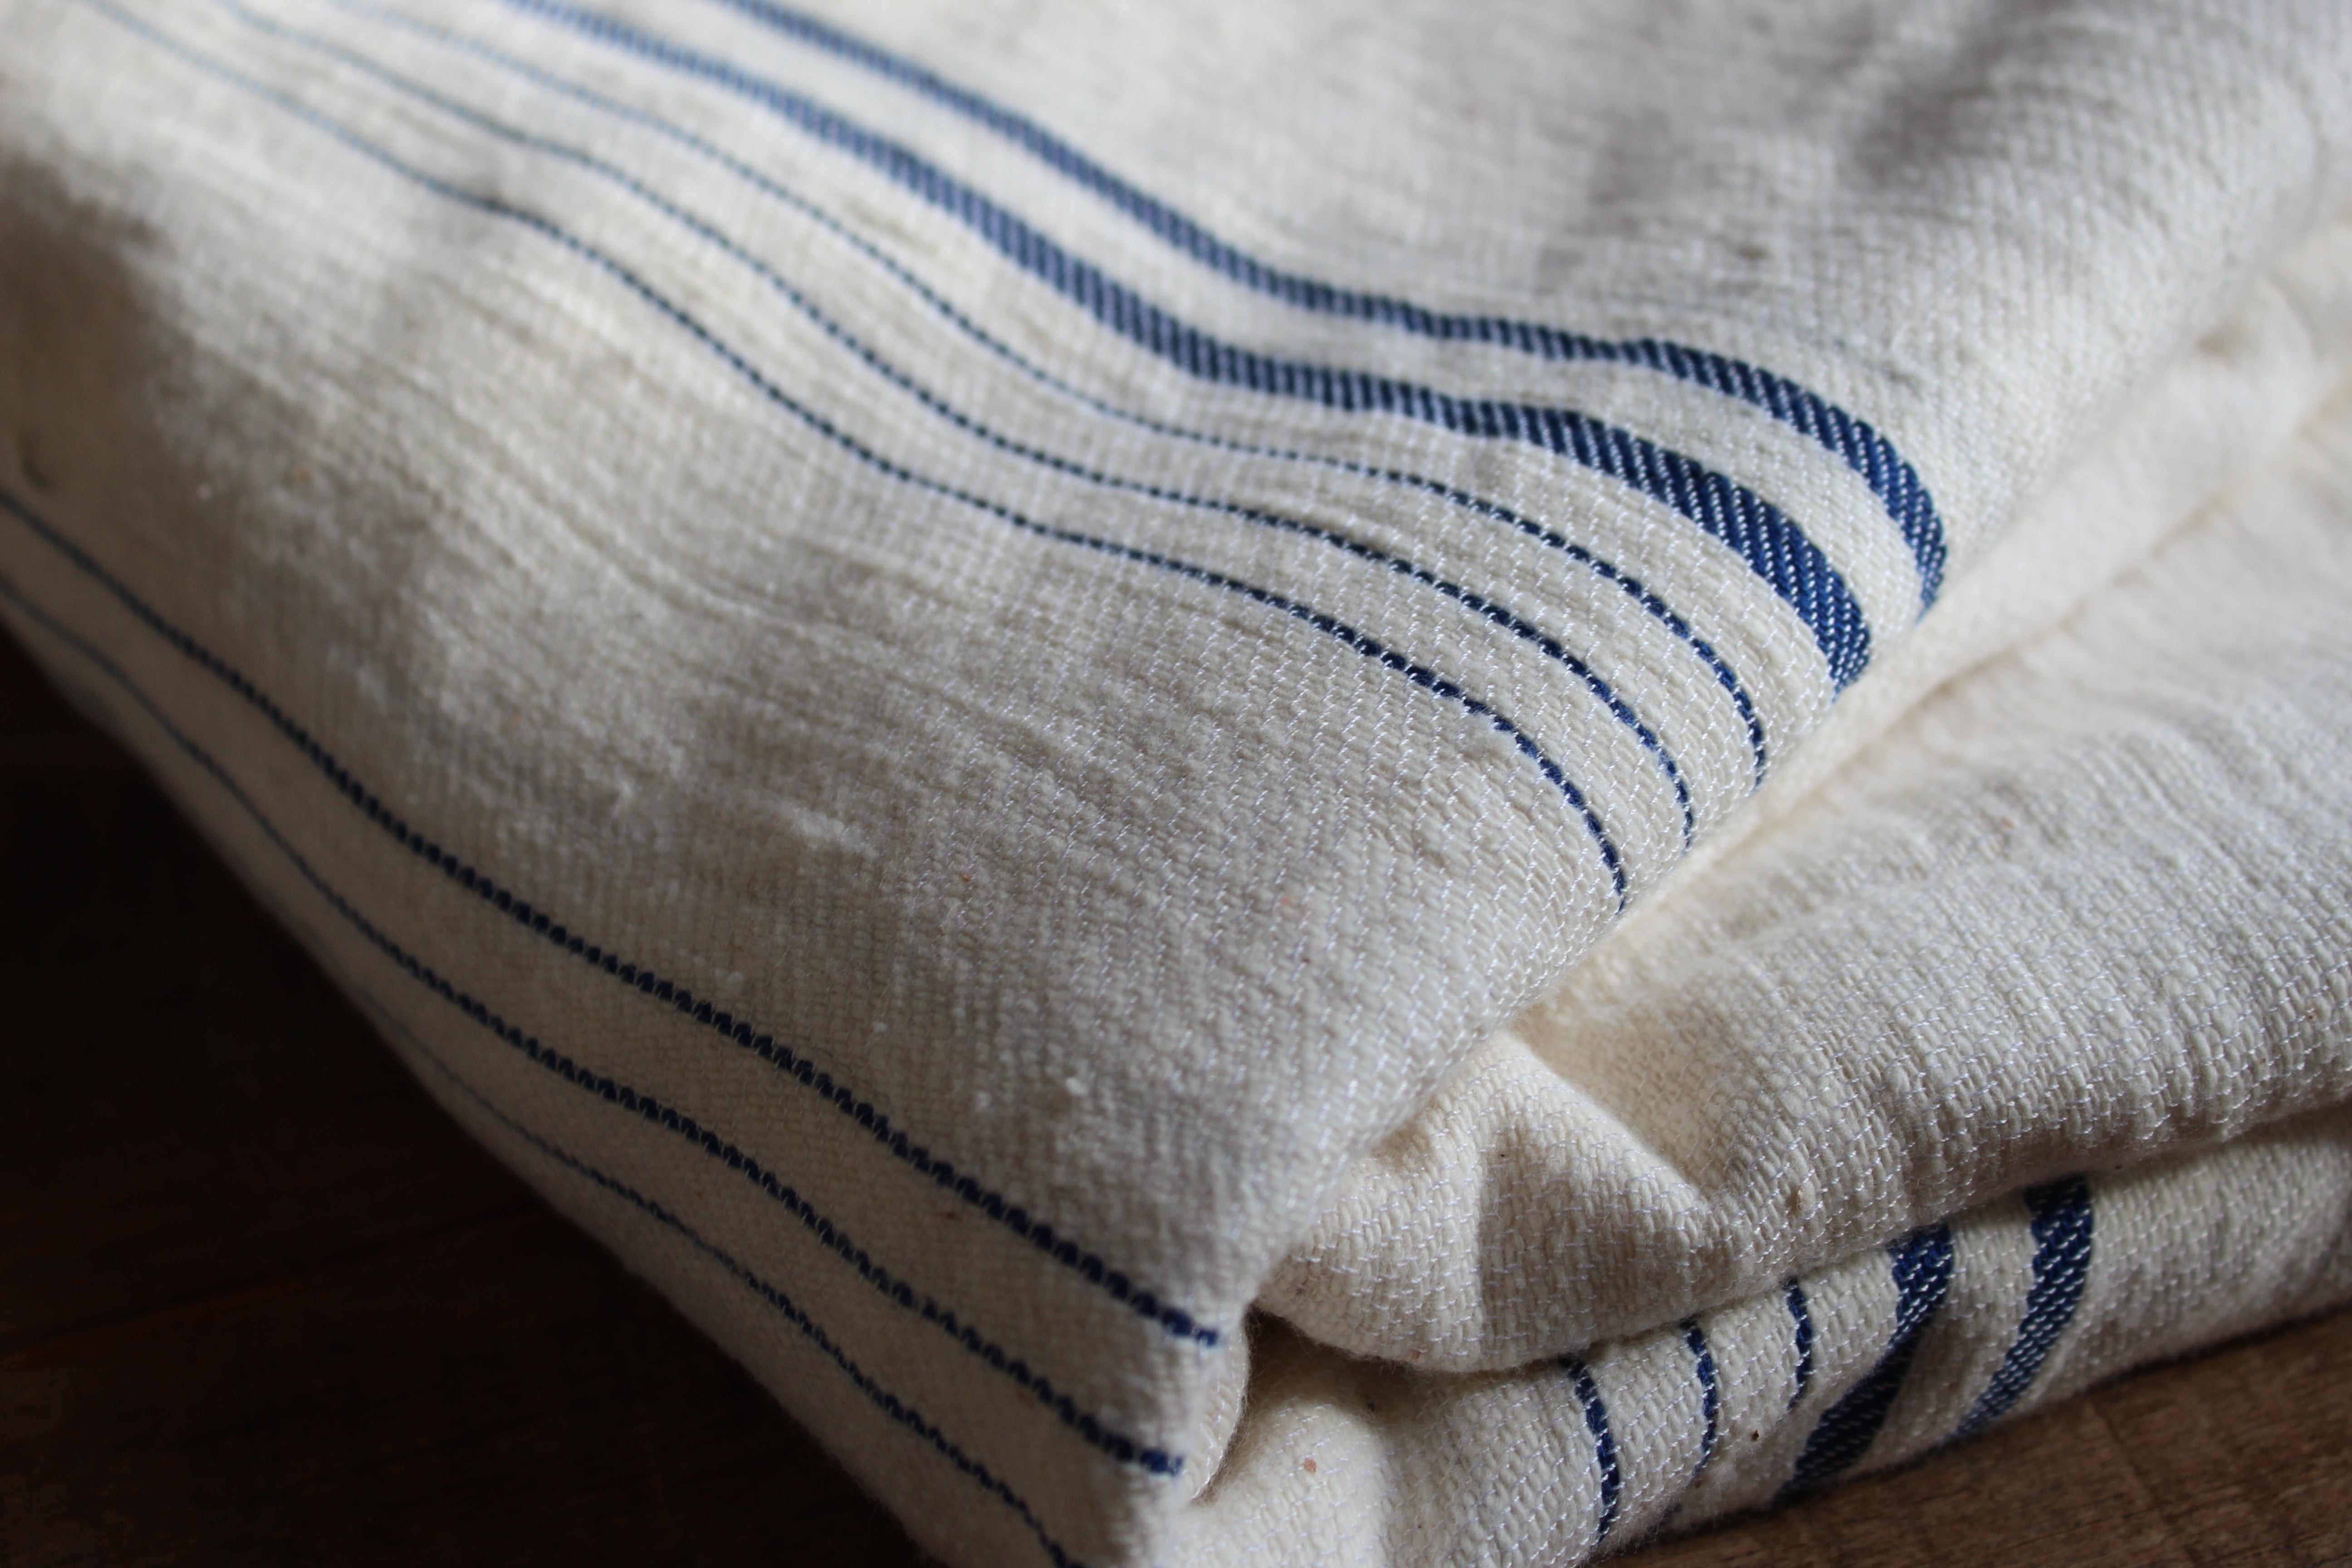 Fiker Woven throw blanket with blue stripes